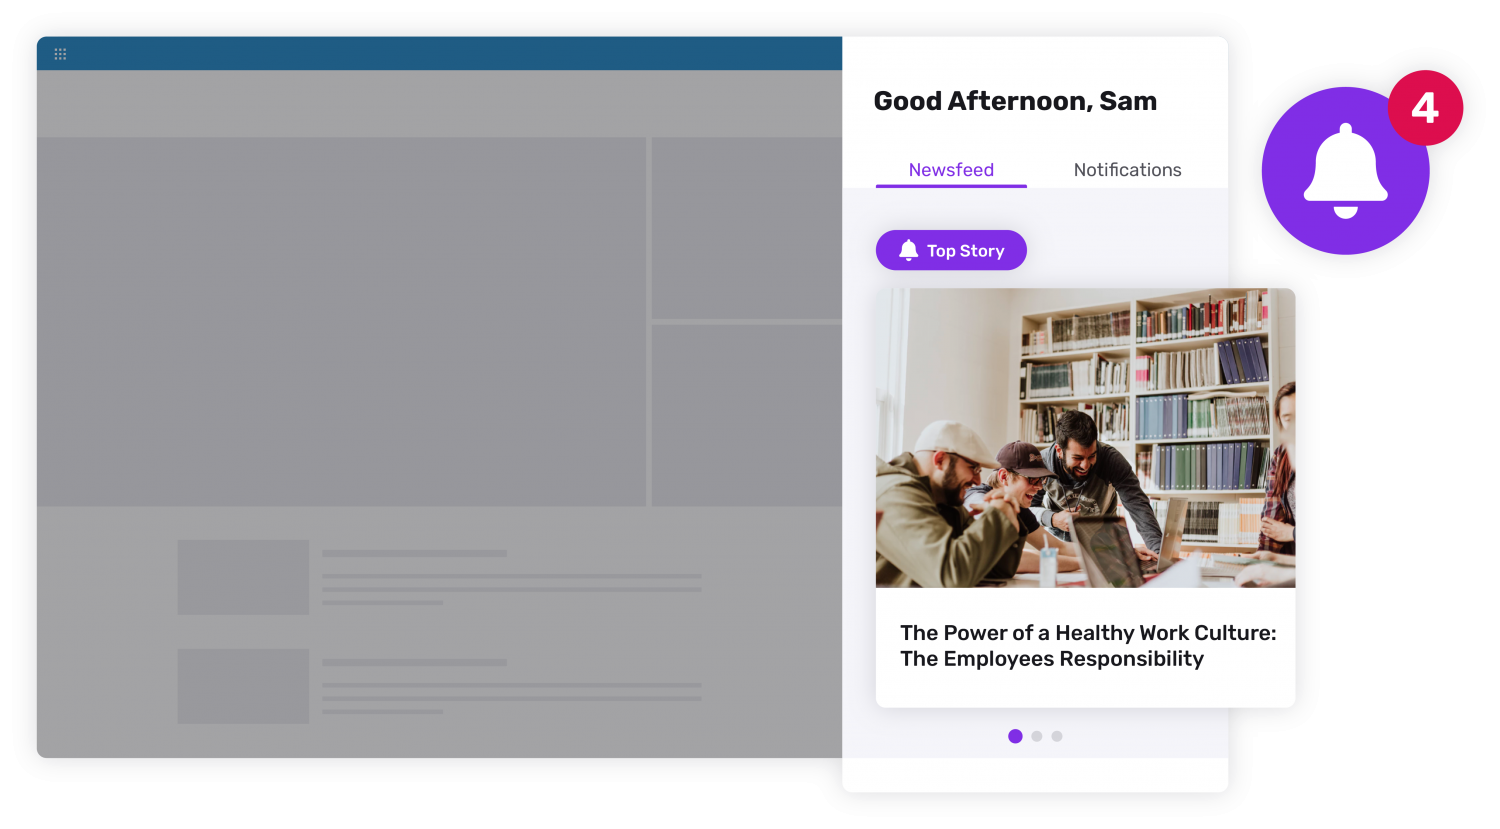 Intranet mock-up with 4 personalized notifications for Sam. the top Story reads "The Power of a Healthy Work Culture: The Employees Responsibility"